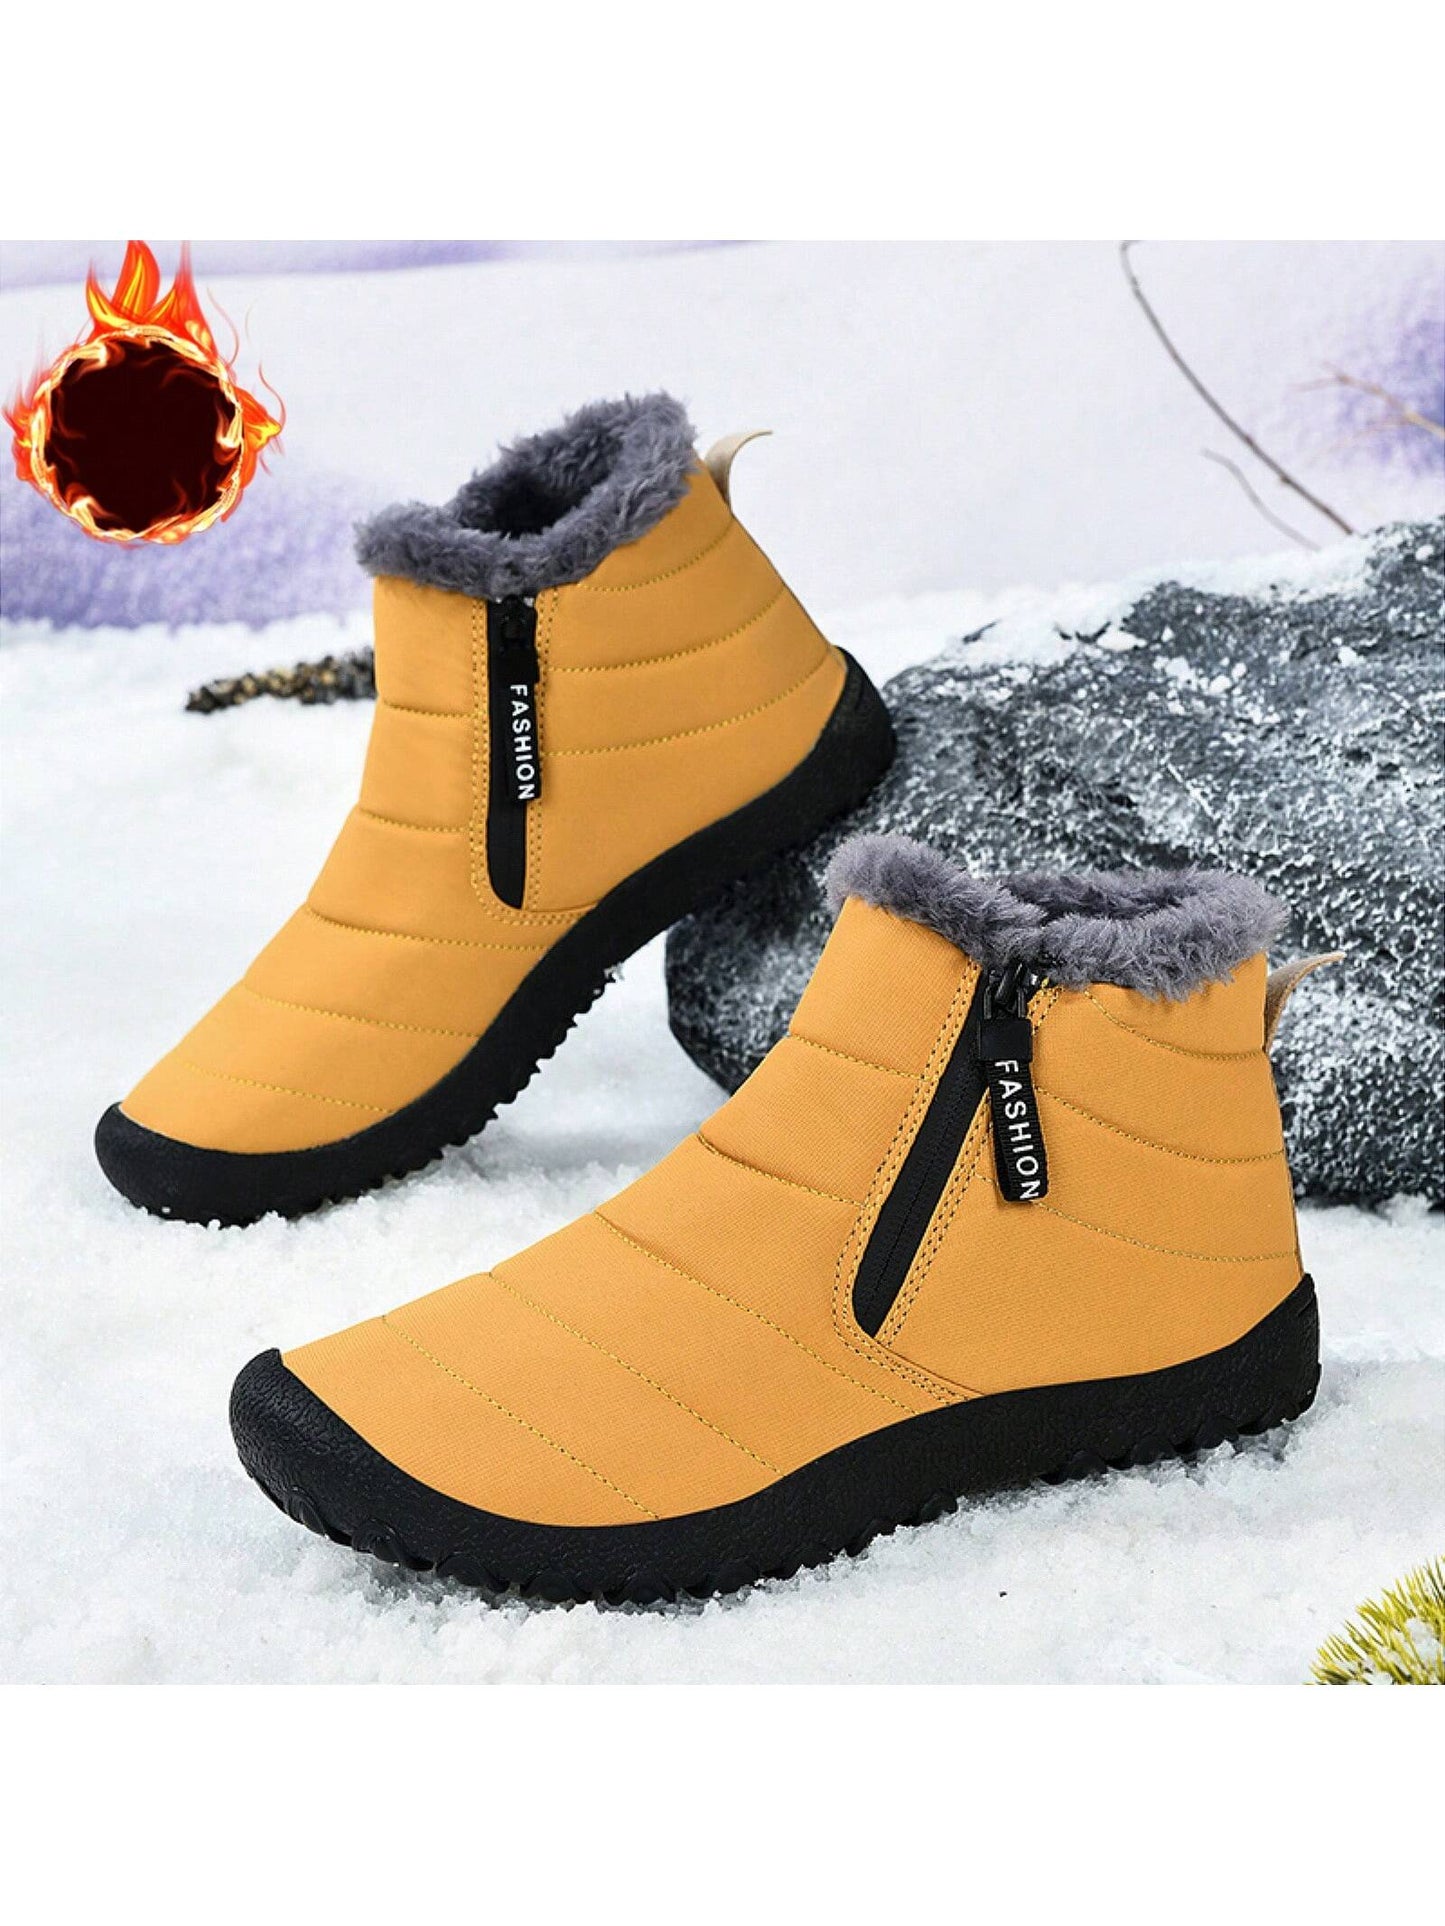 Men's Snow Boots, Waterproof Non Slip Warm Comfy Ankle Boots For Outdoor Hiking Trekking, Winter